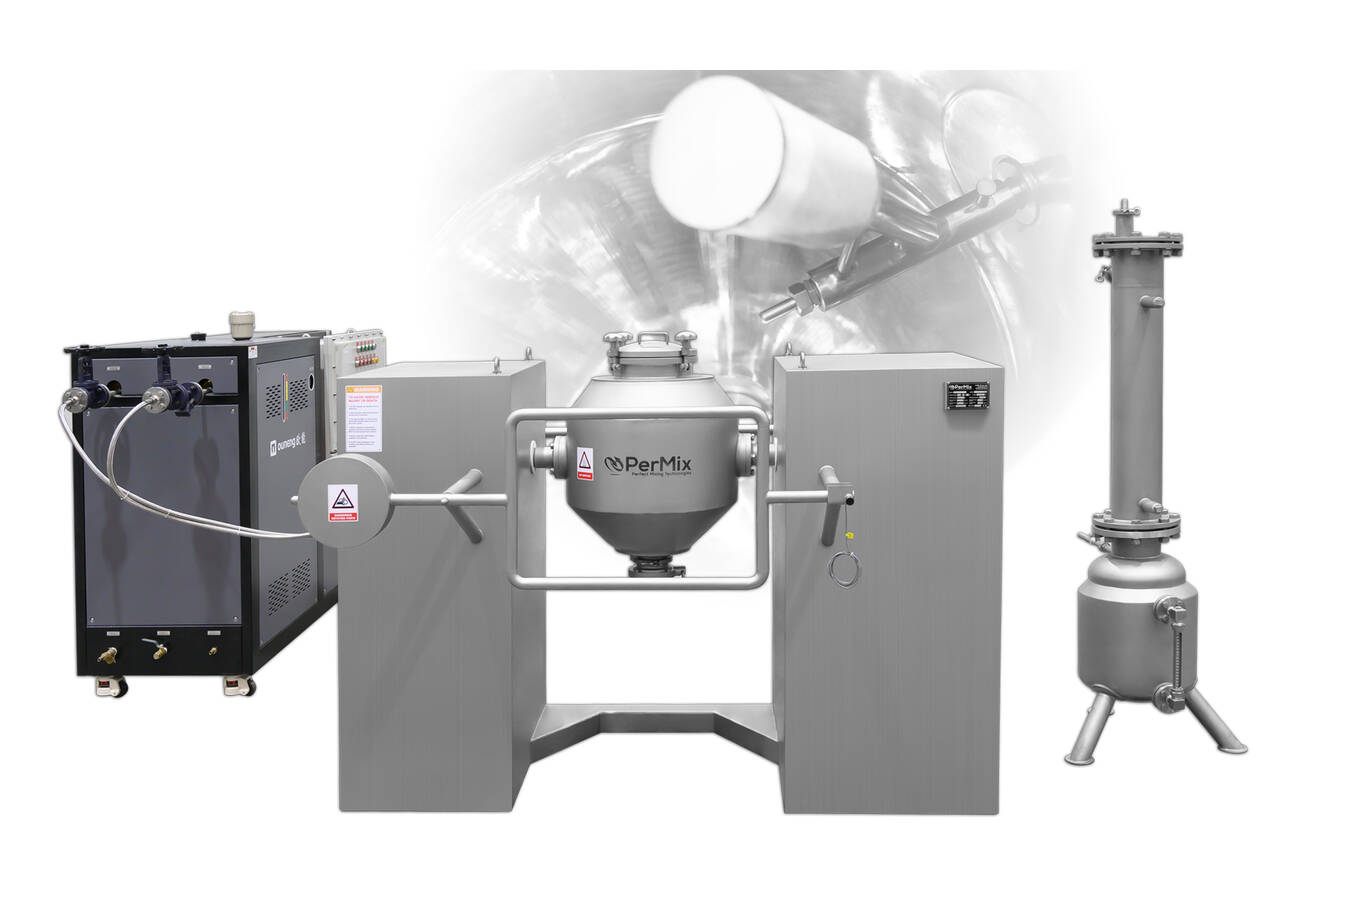 The PerMix Double Cone Mixer performs the mixing by turning the vessel around the shaft, and is suitable for rapid and uniform mixing of free-flowing dry powders, granules, and crystals.